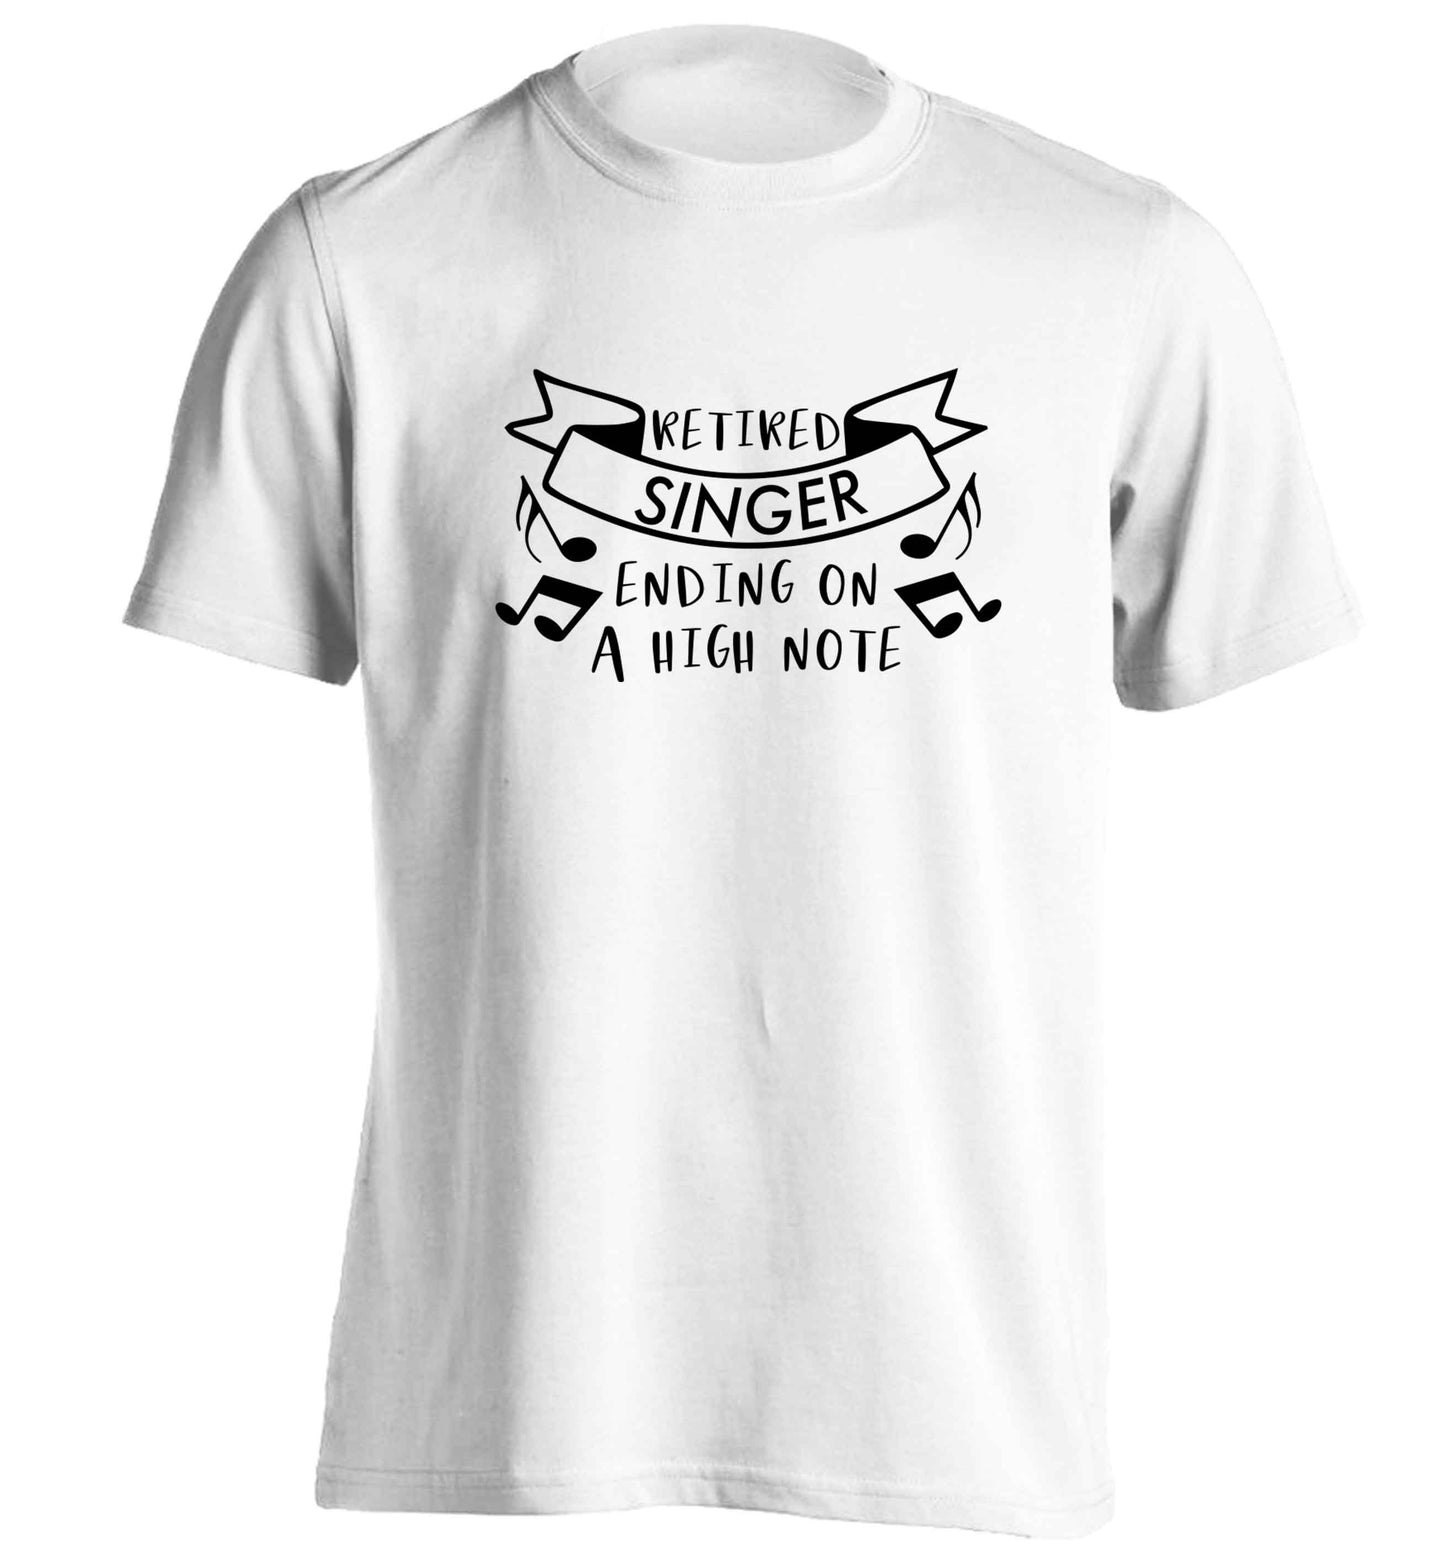 Retired singer ending on a high note adults unisex white Tshirt 2XL